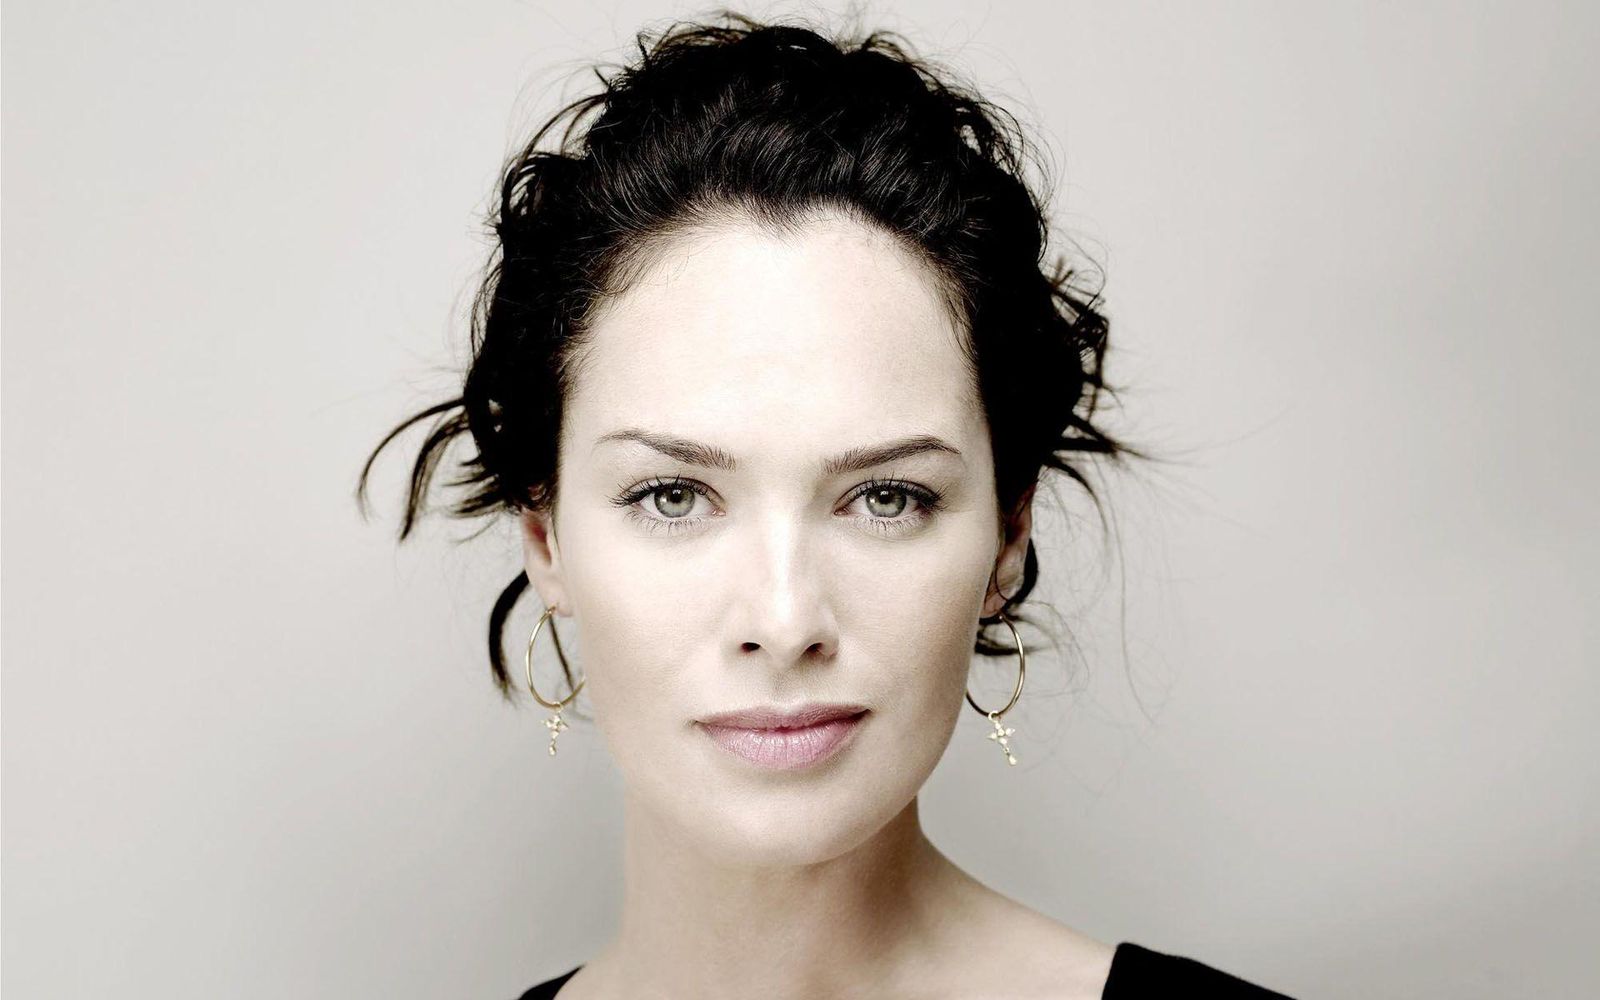 Lena Headey Makes Revelation About Her Meeting With Harvey Weinstein